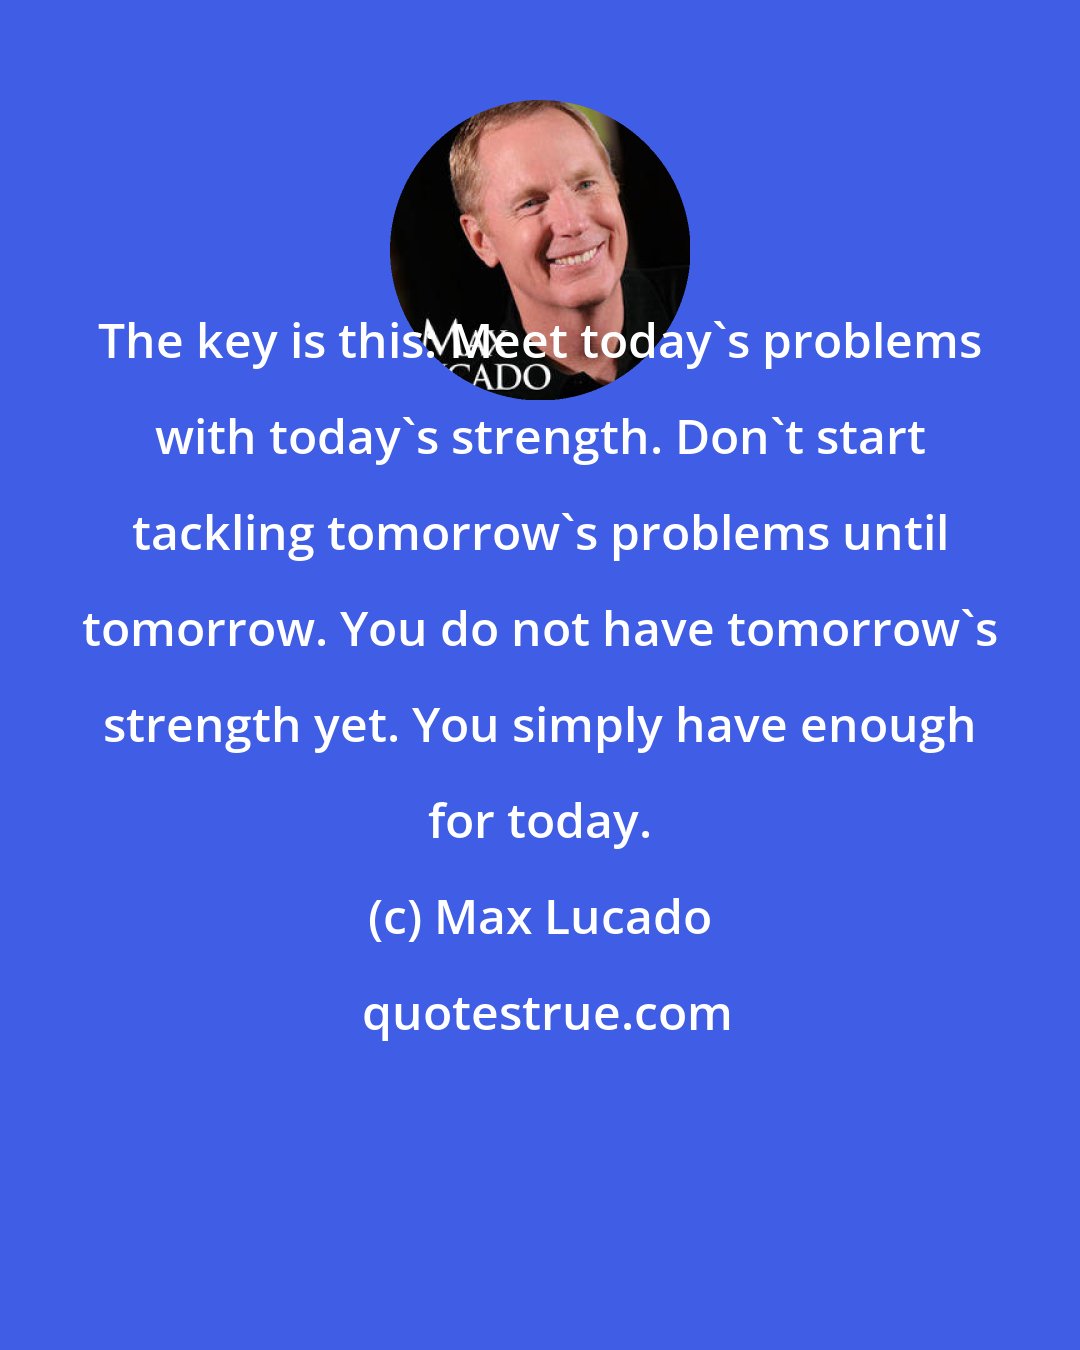 Max Lucado: The key is this: Meet today's problems with today's strength. Don't start tackling tomorrow's problems until tomorrow. You do not have tomorrow's strength yet. You simply have enough for today.